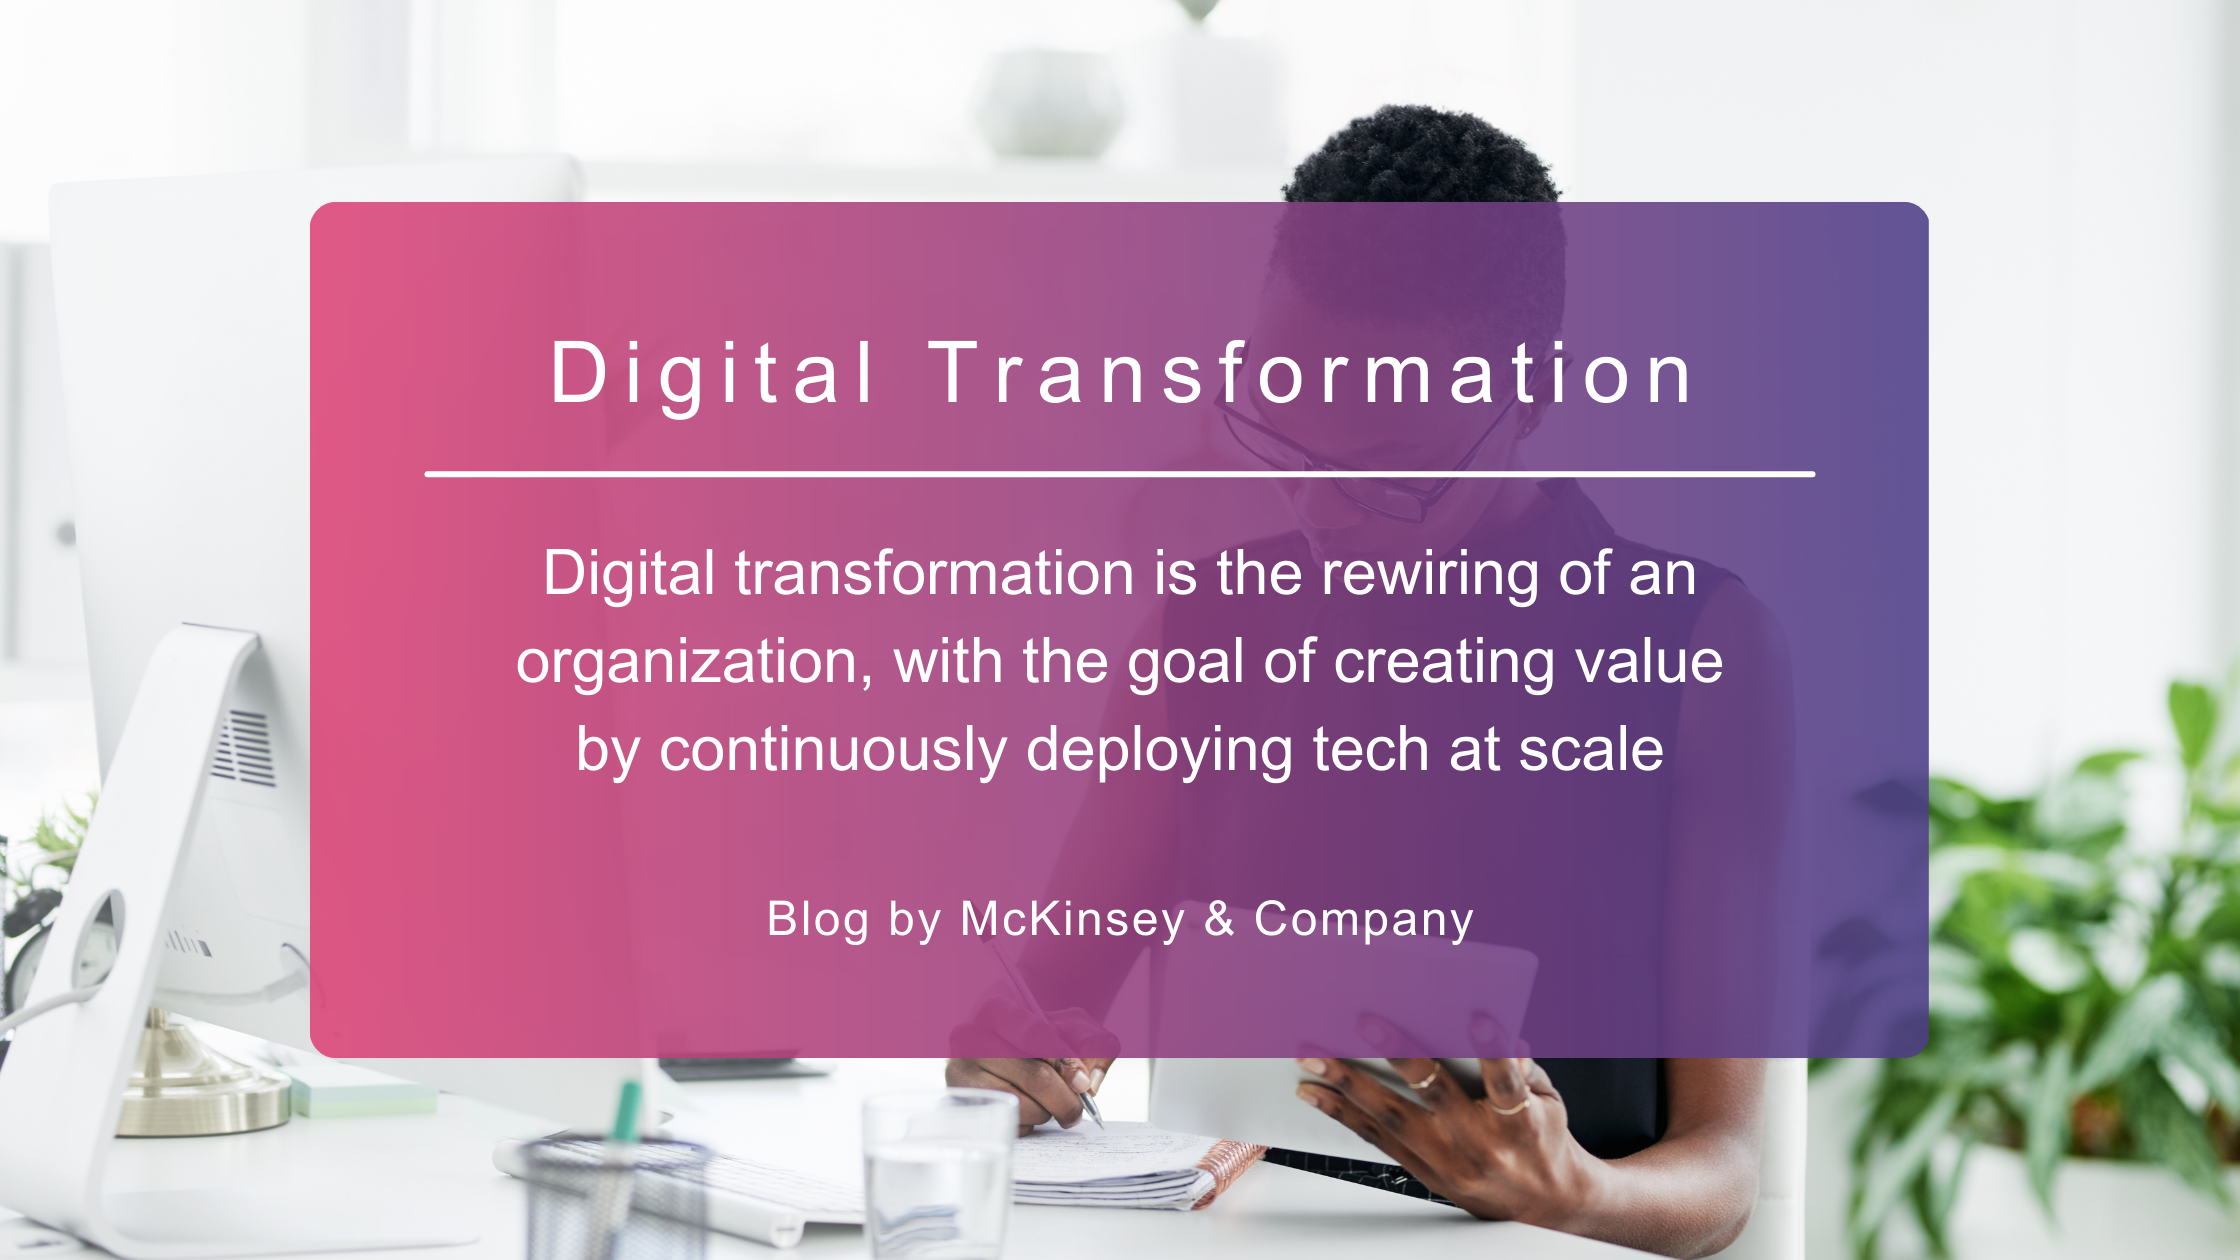 Shows a pink transparent box that provides a definition of digital transformation. Behind the box is the image of a woman working at a desk.